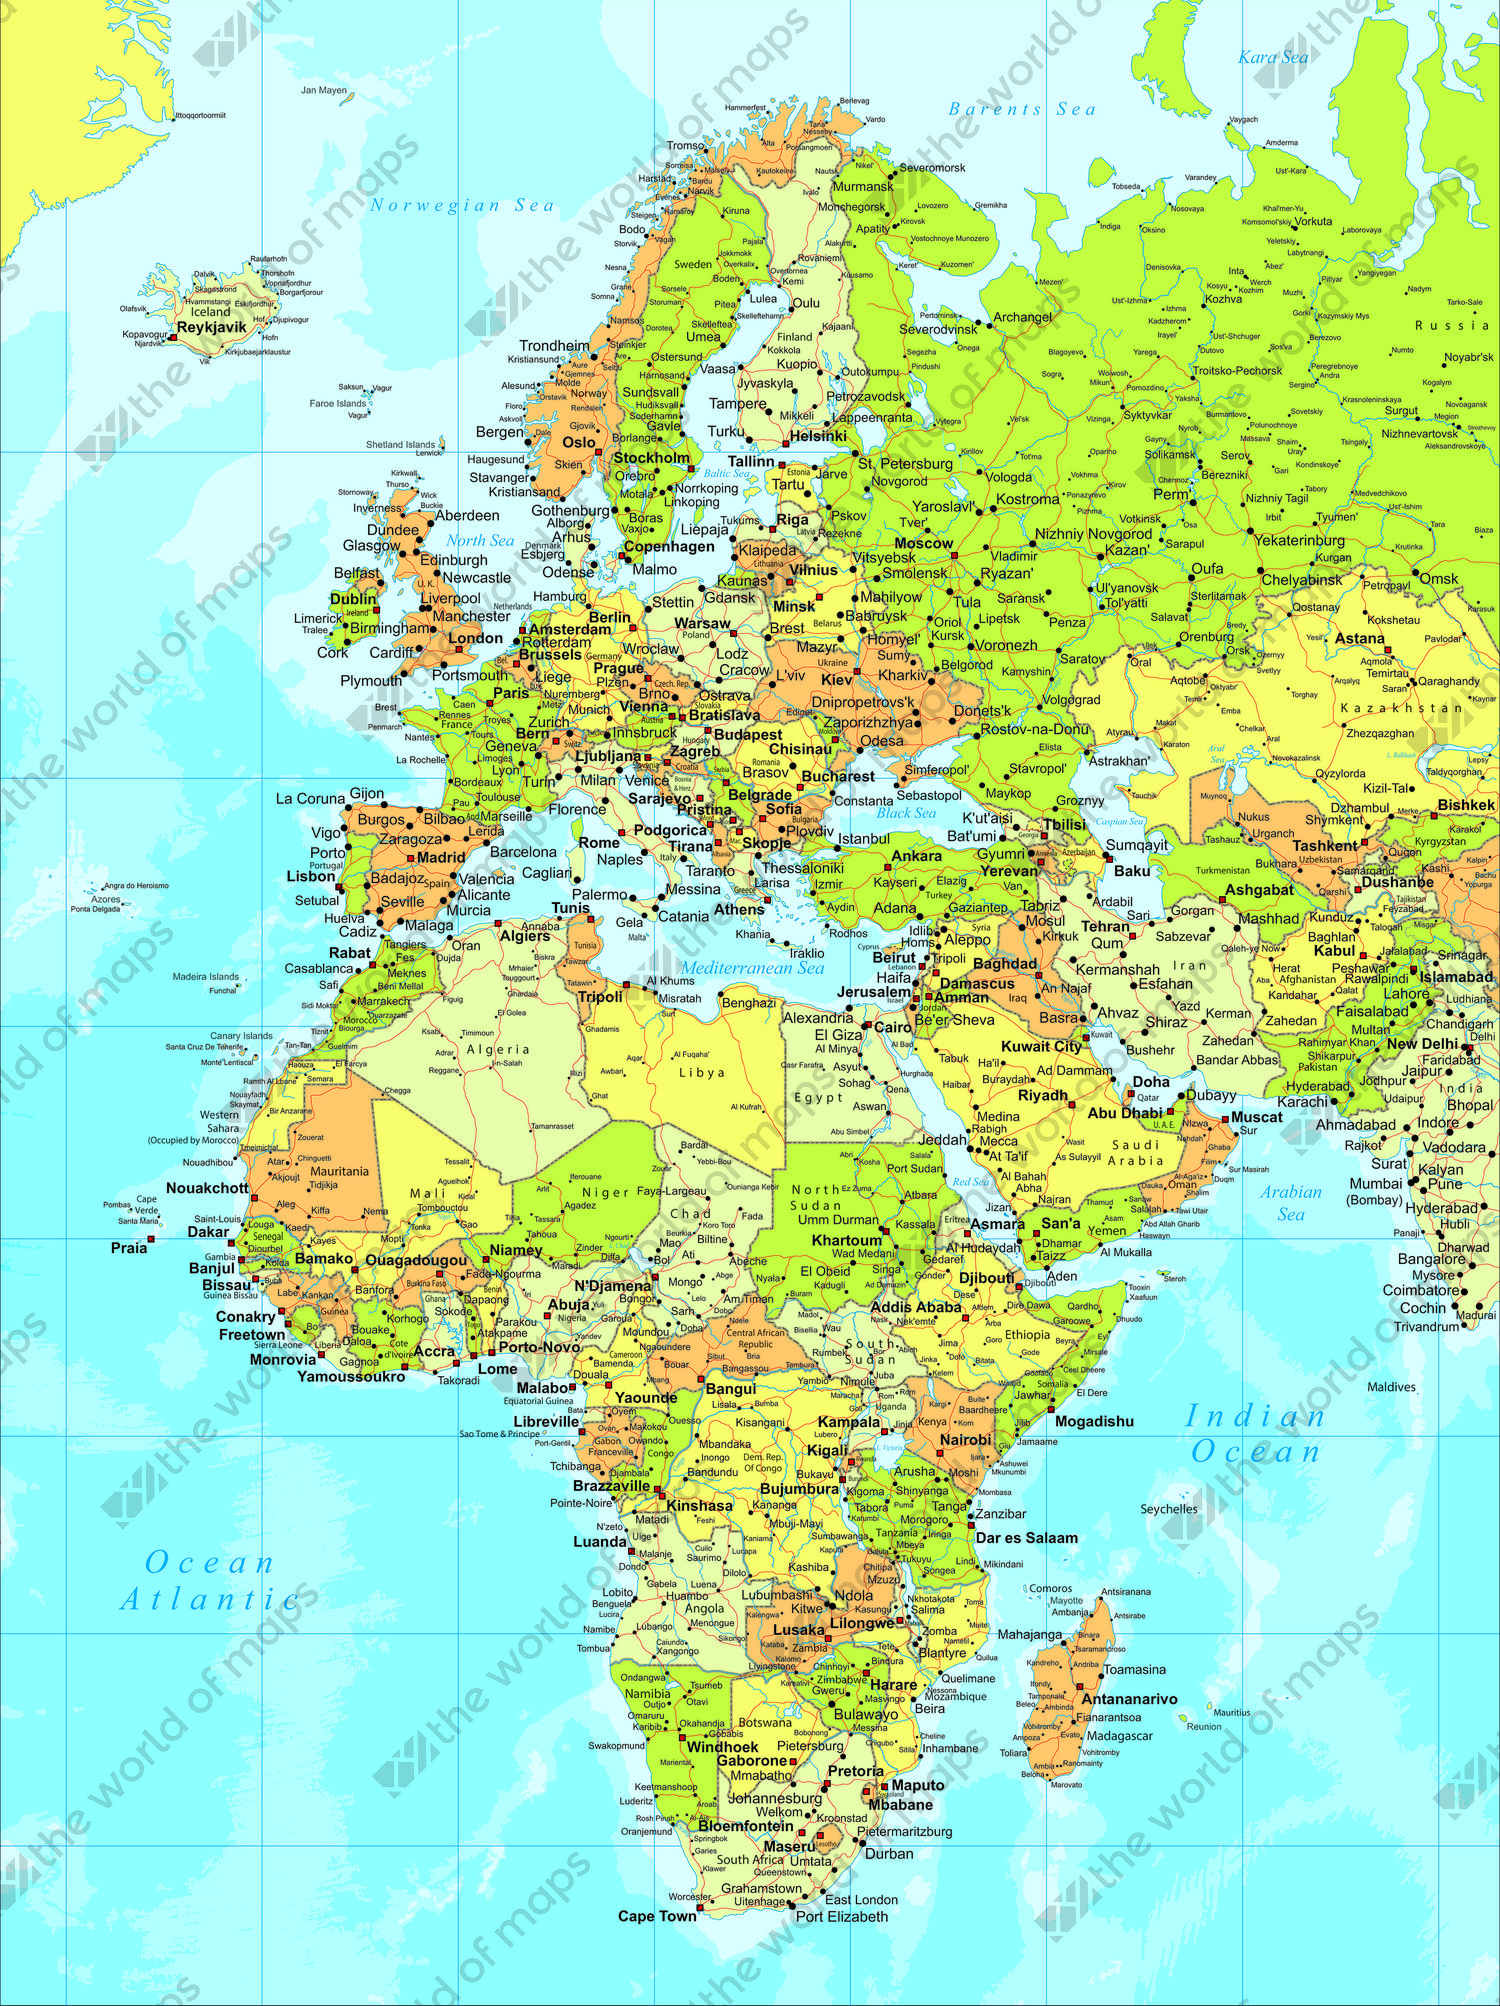 Digital Map Europe Middle East And Africa 781 The World Of Maps Com